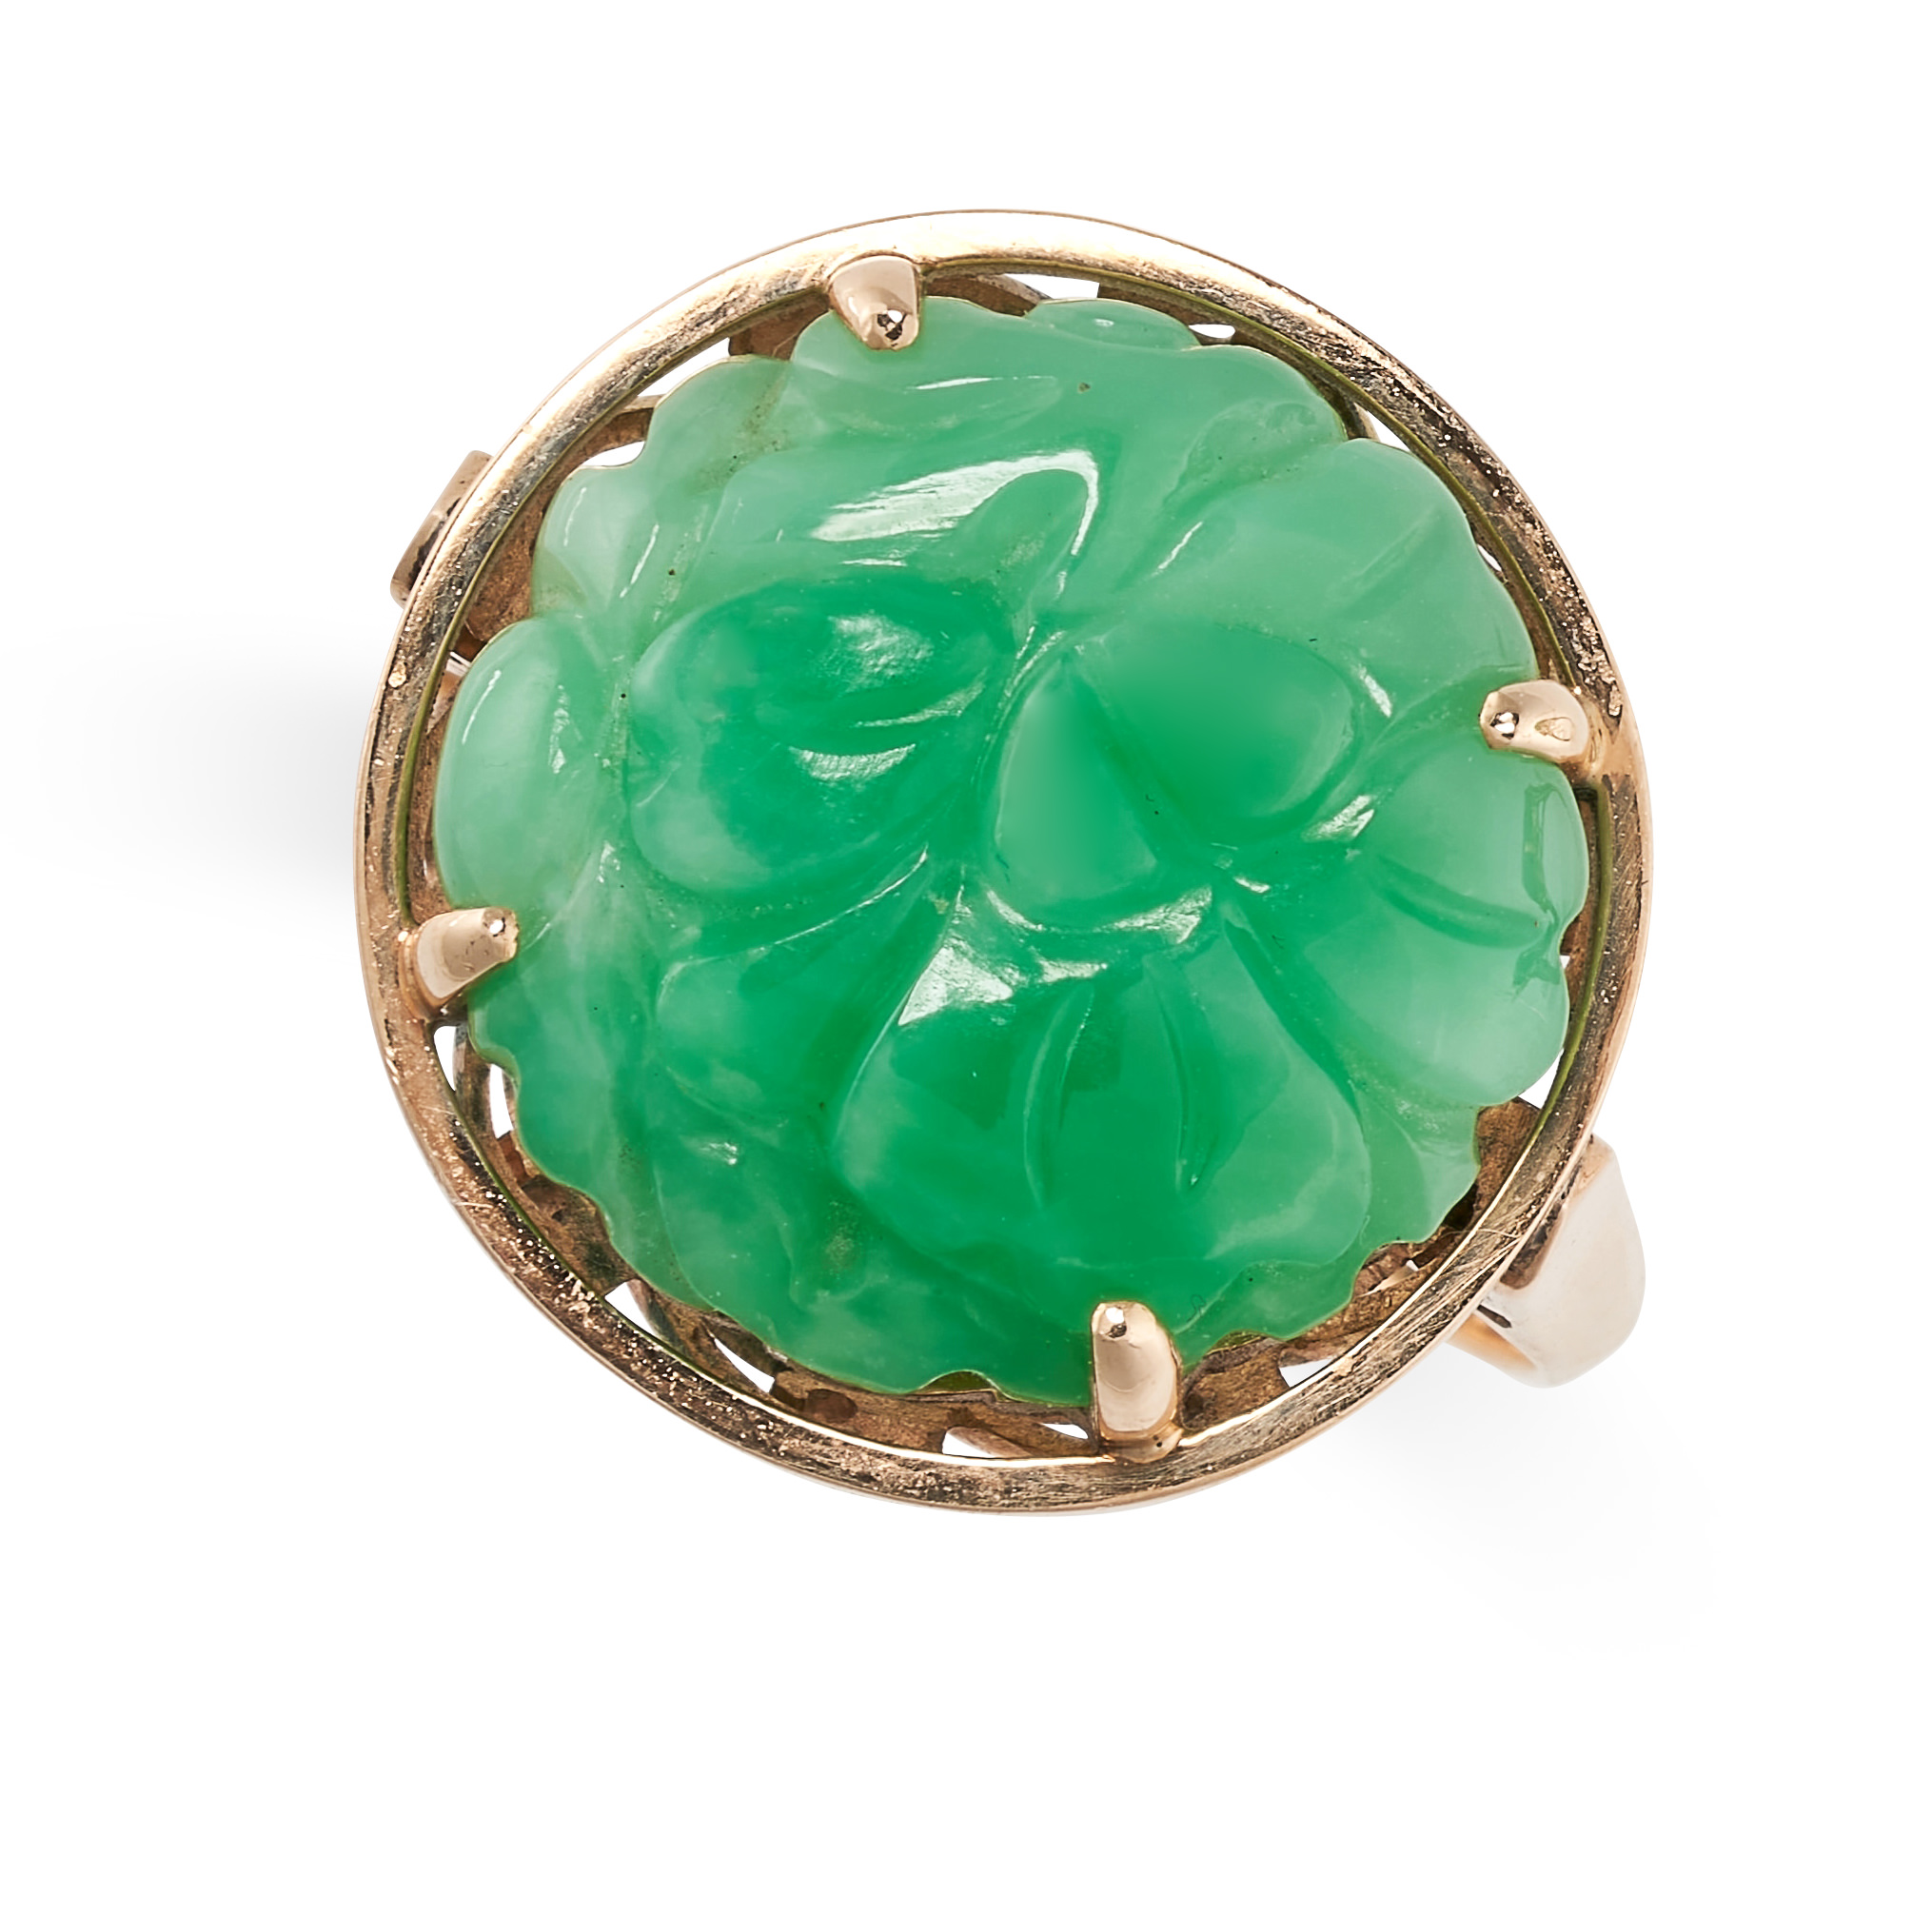 A JADEITE JADE DRESS RING in 14ct yellow gold, set with a circular piece of jadeite carved in the